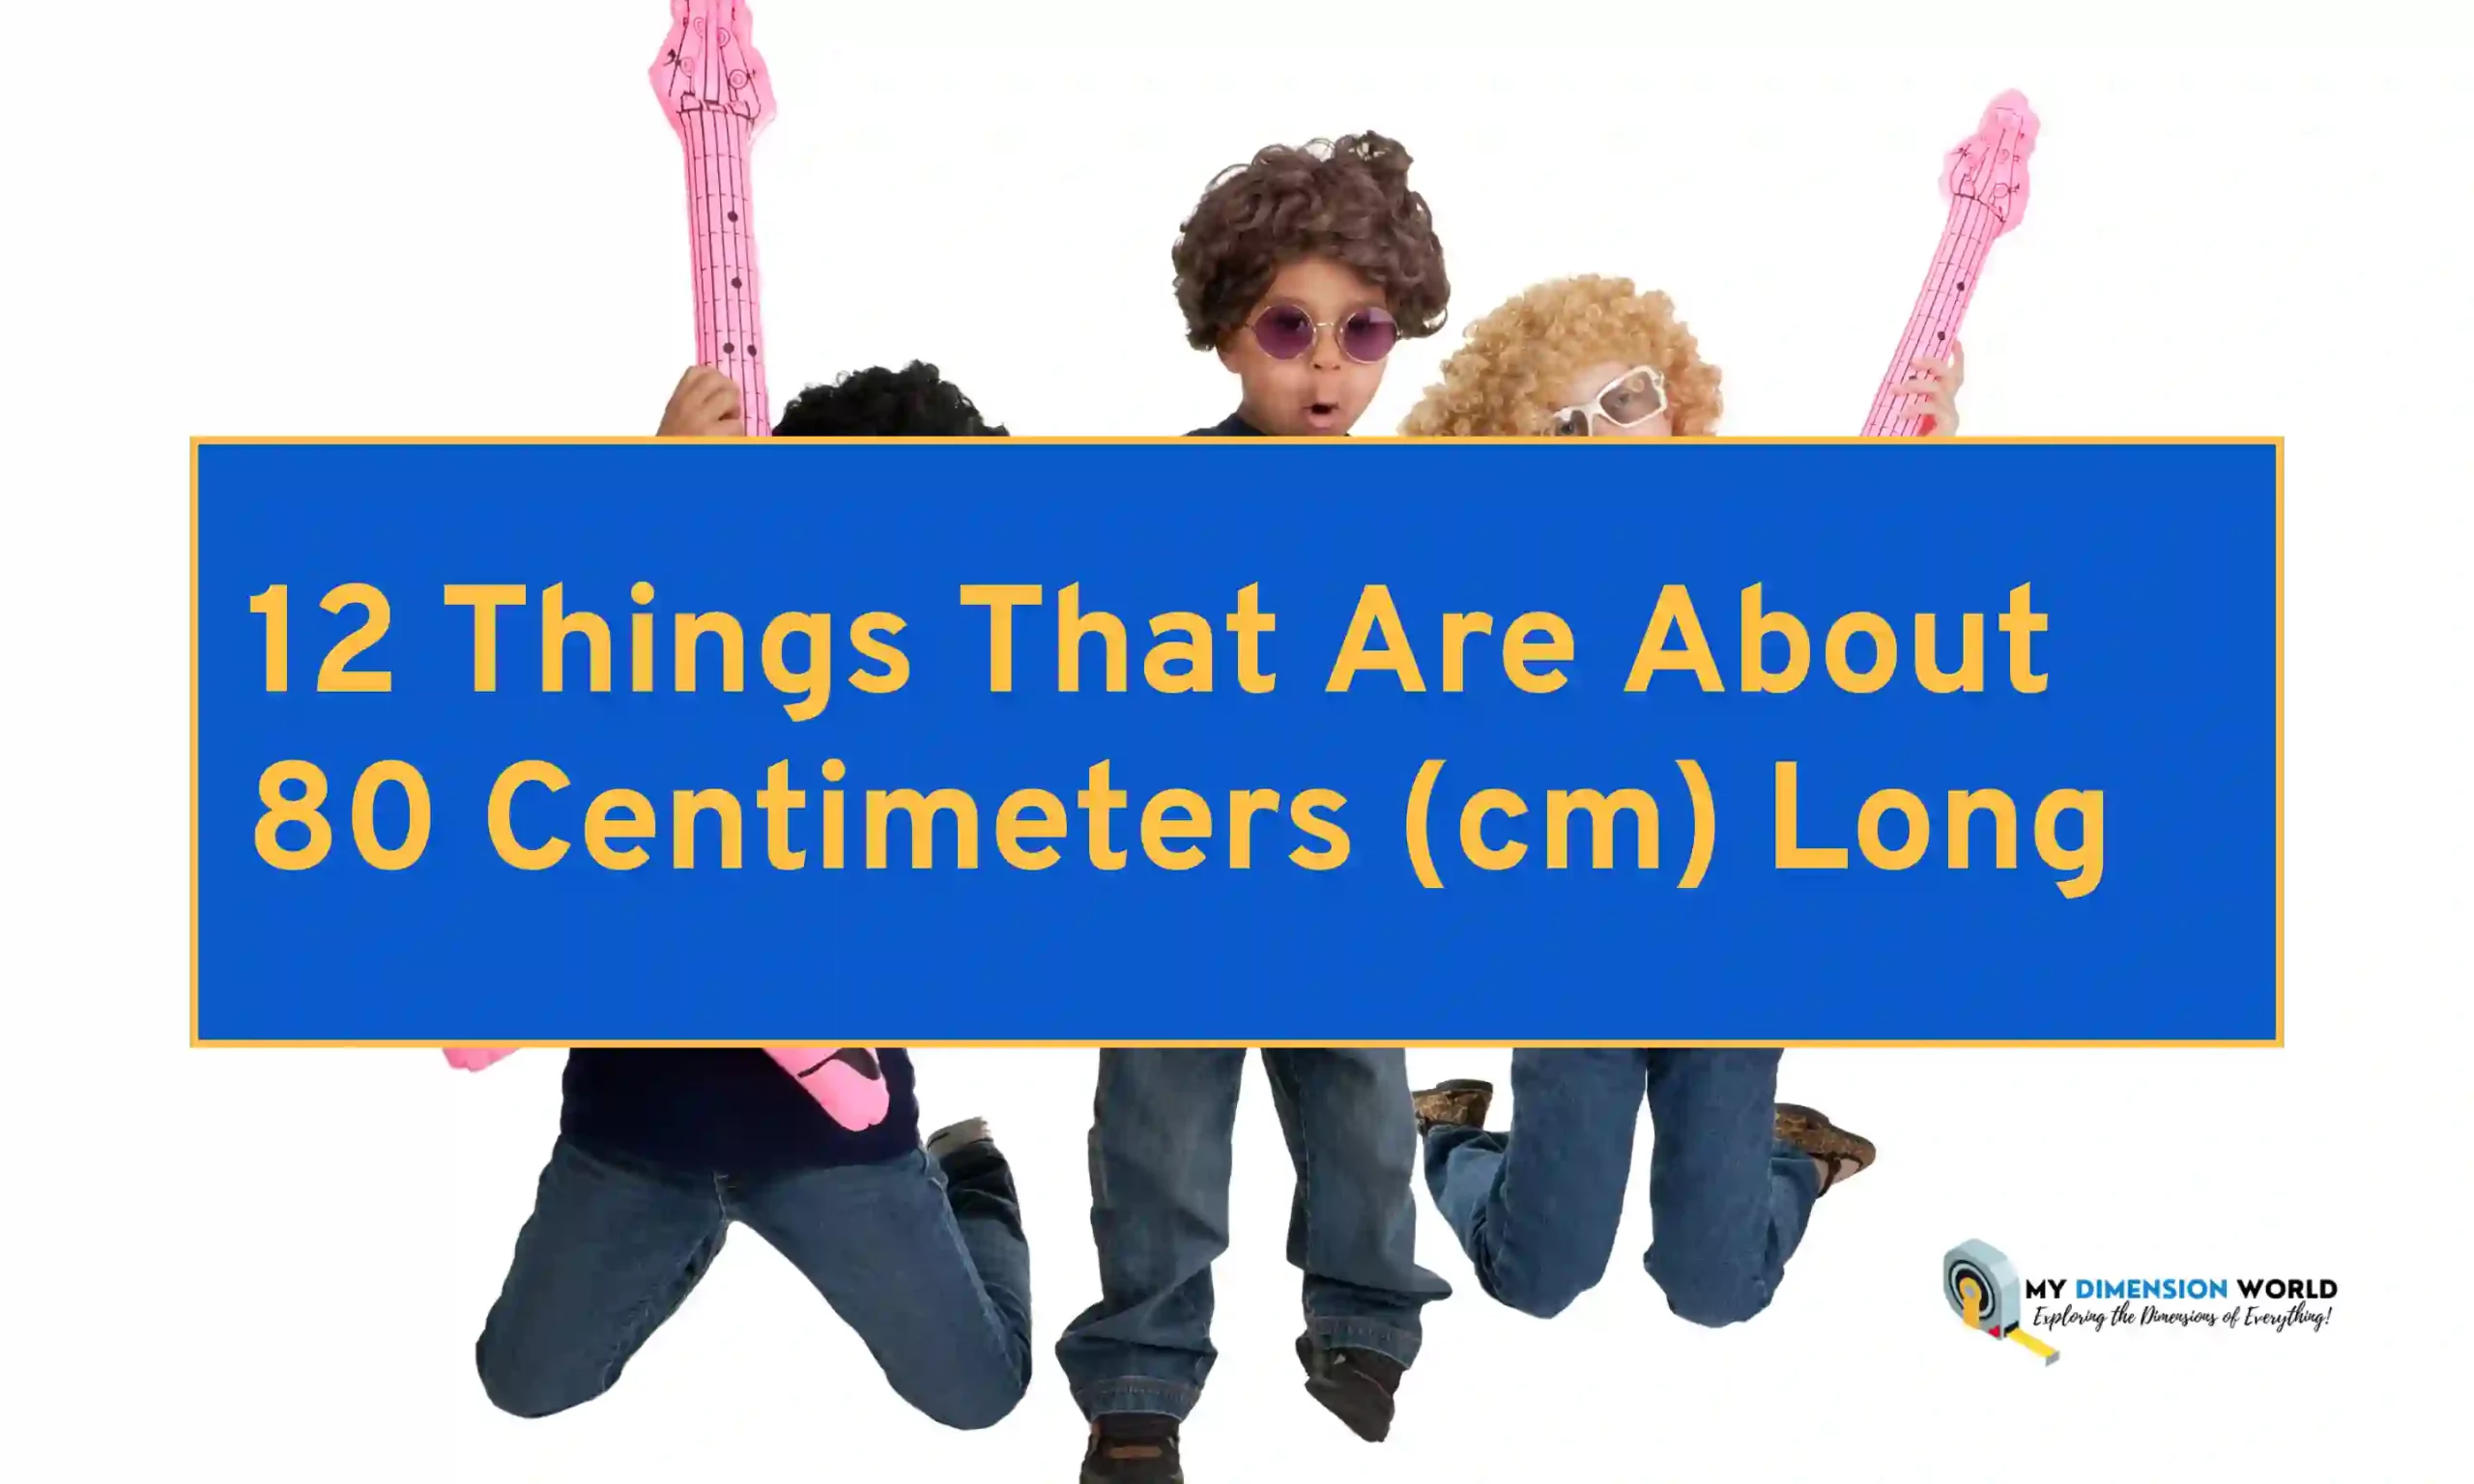 12 Things That Are About 80 Centimeters (cm) Long